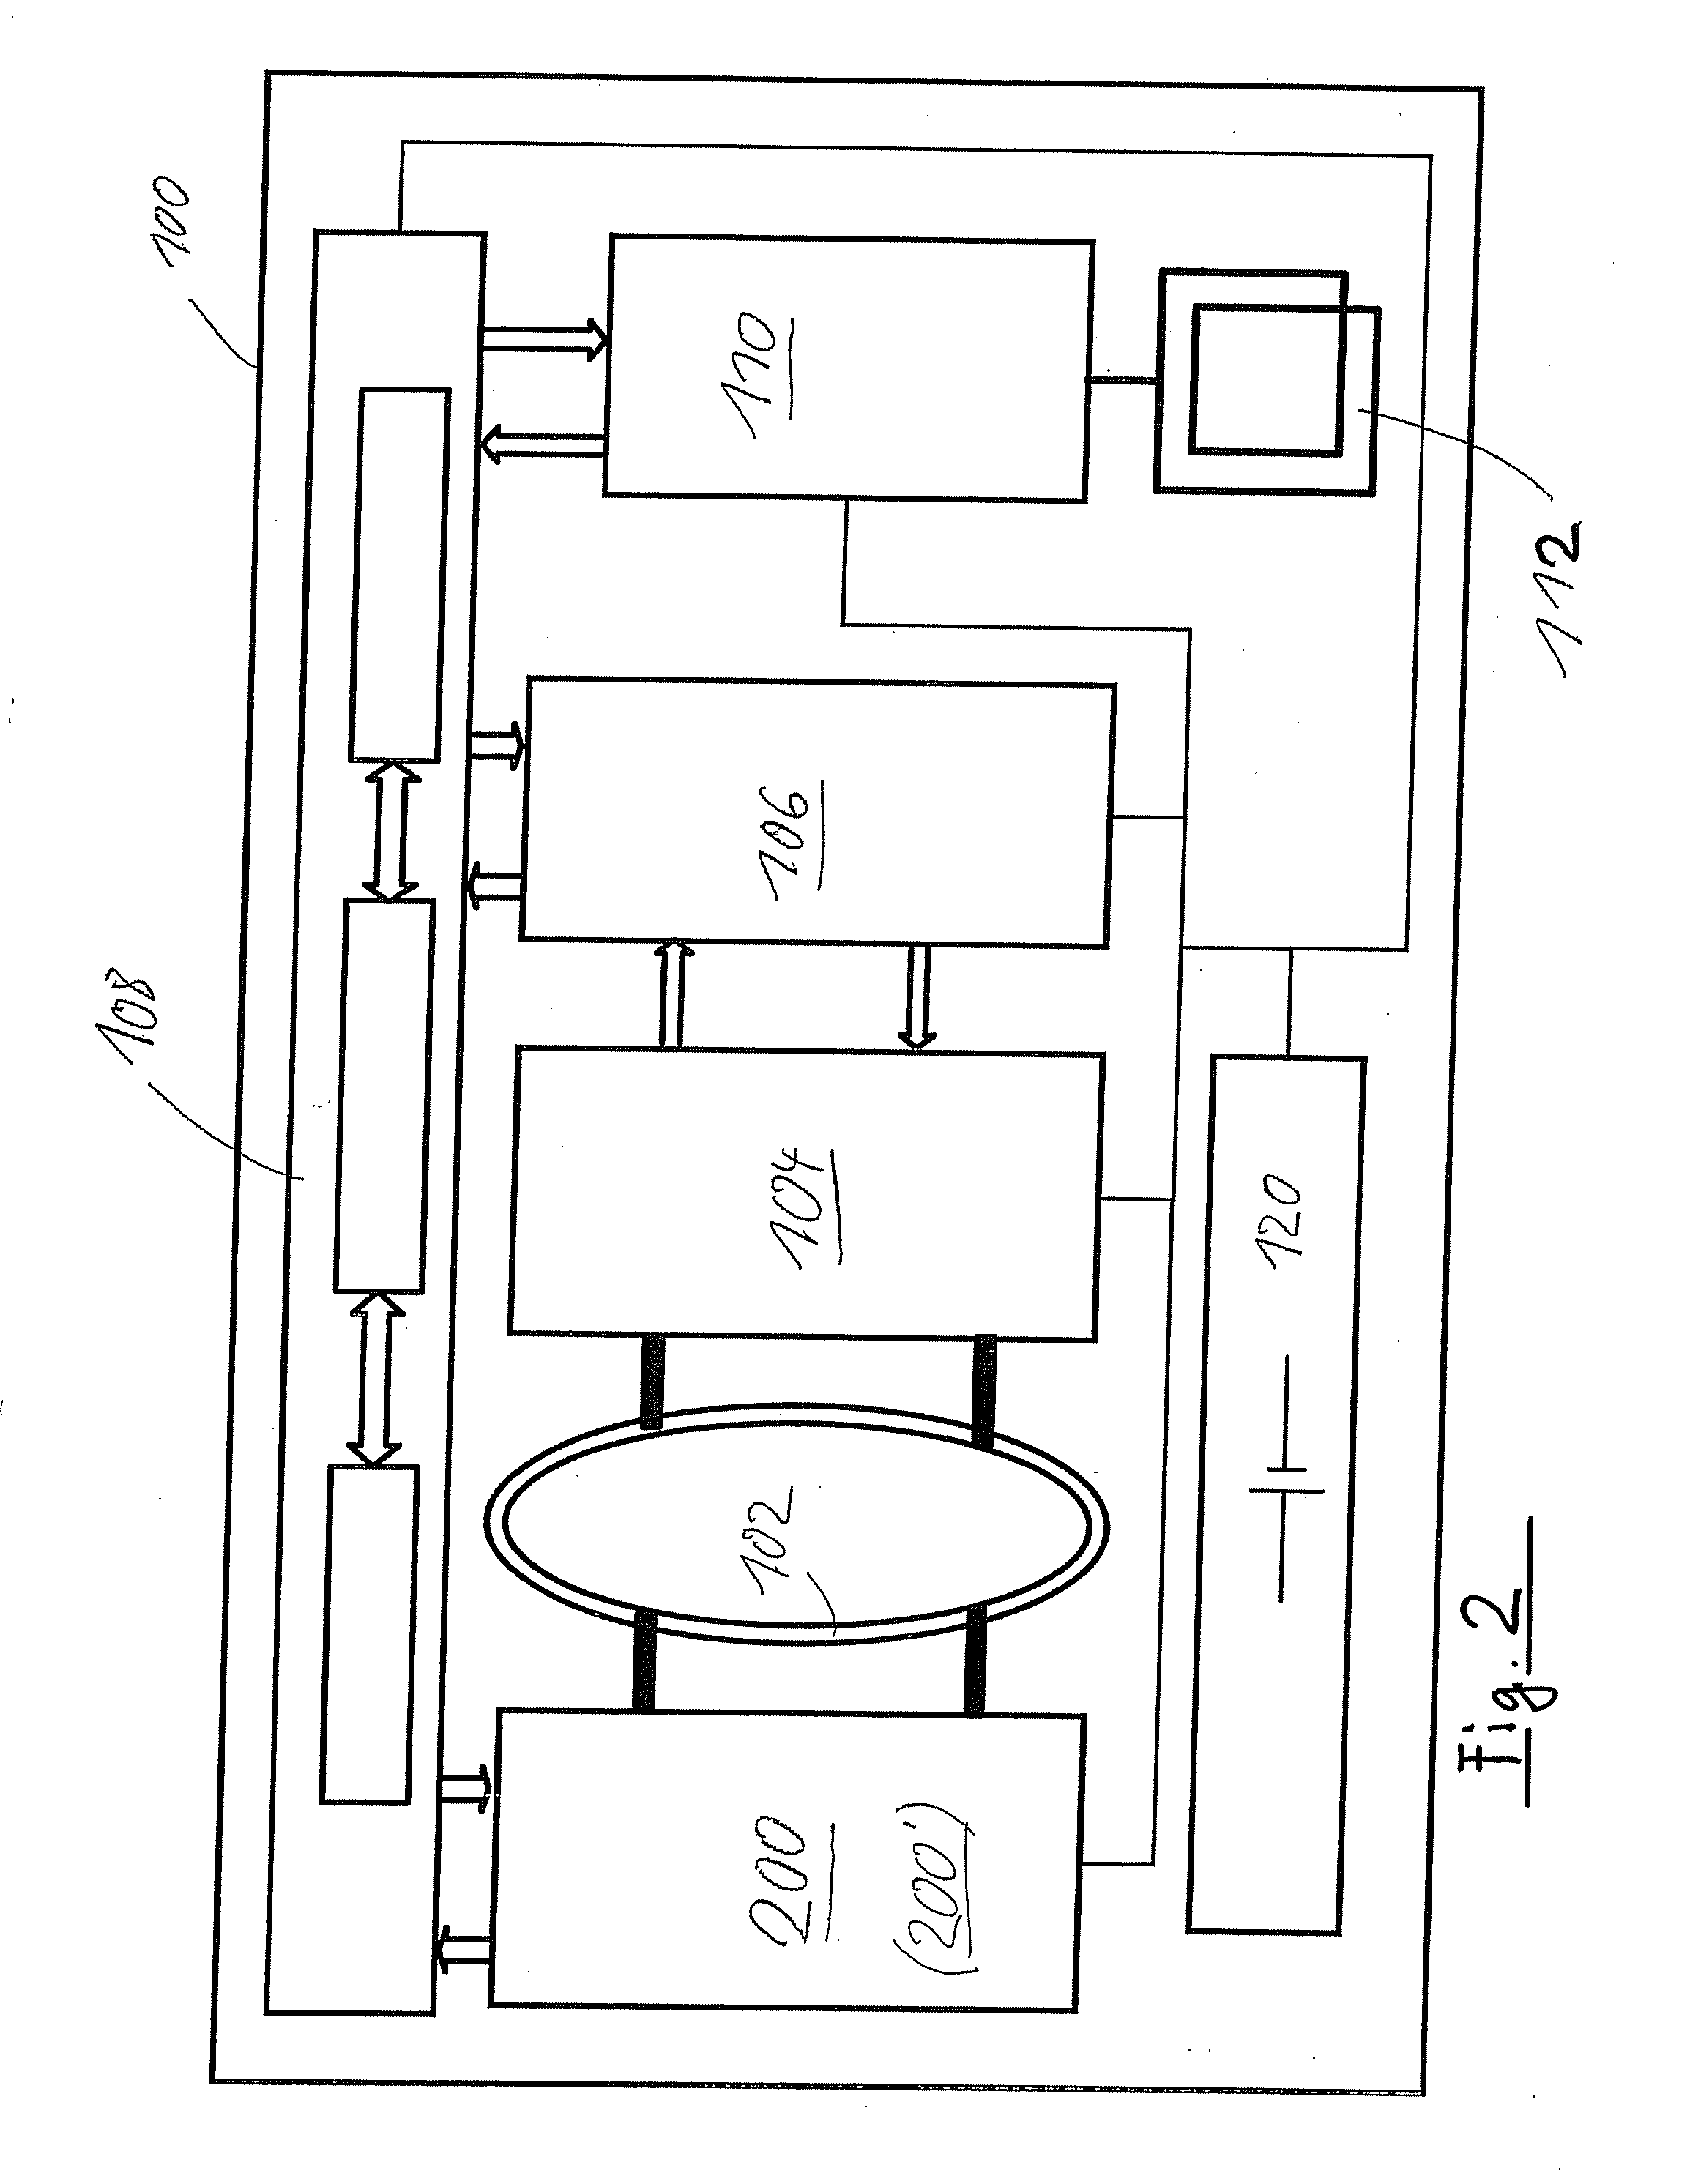 Low-energy detection of a transponder by means of read unit and a system for identity determination and/or authorization determination, optionally in the form of a locking system